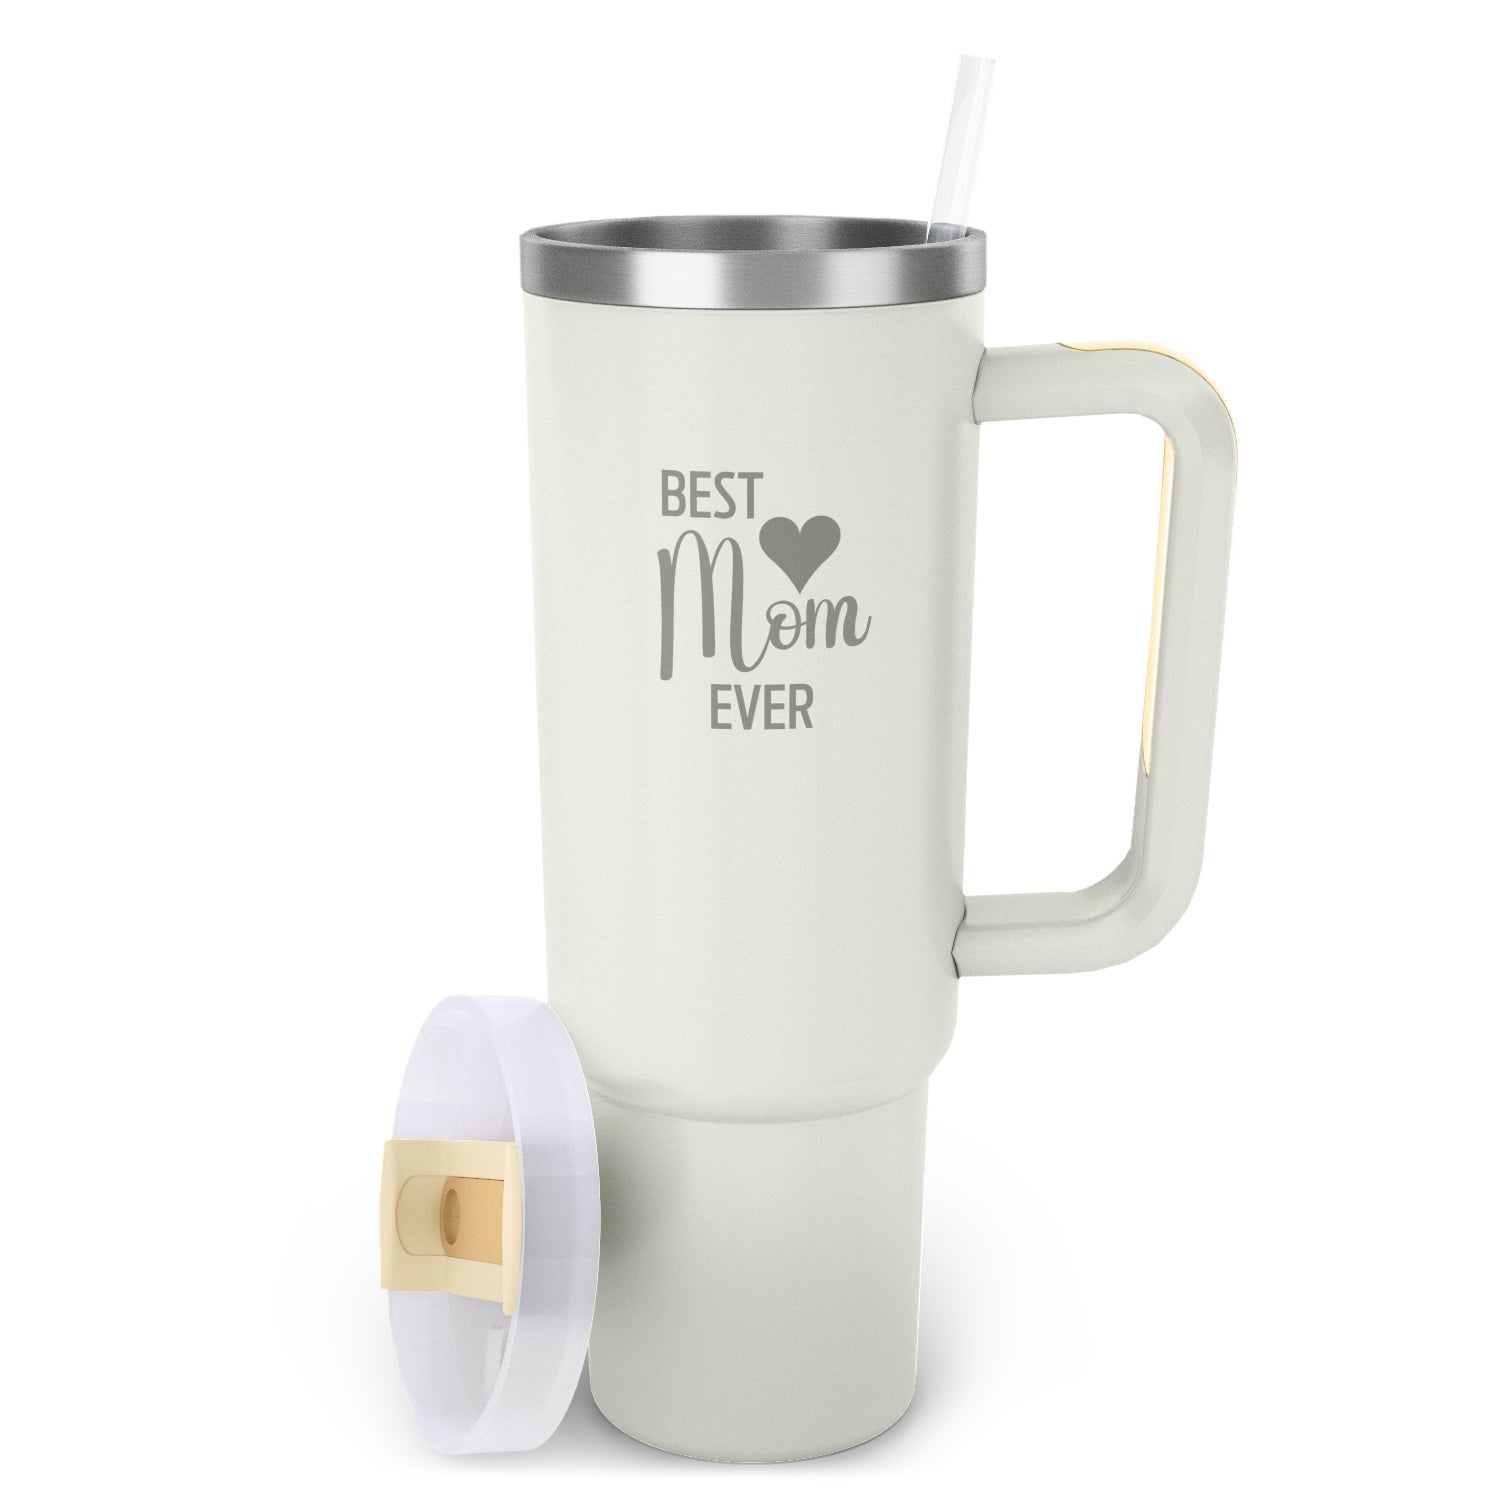 HOMISBES Best Mom Tumbler - She is Strong Vacuum Insulated Stainless Steel  Travel Mug with Straw for…See more HOMISBES Best Mom Tumbler - She is